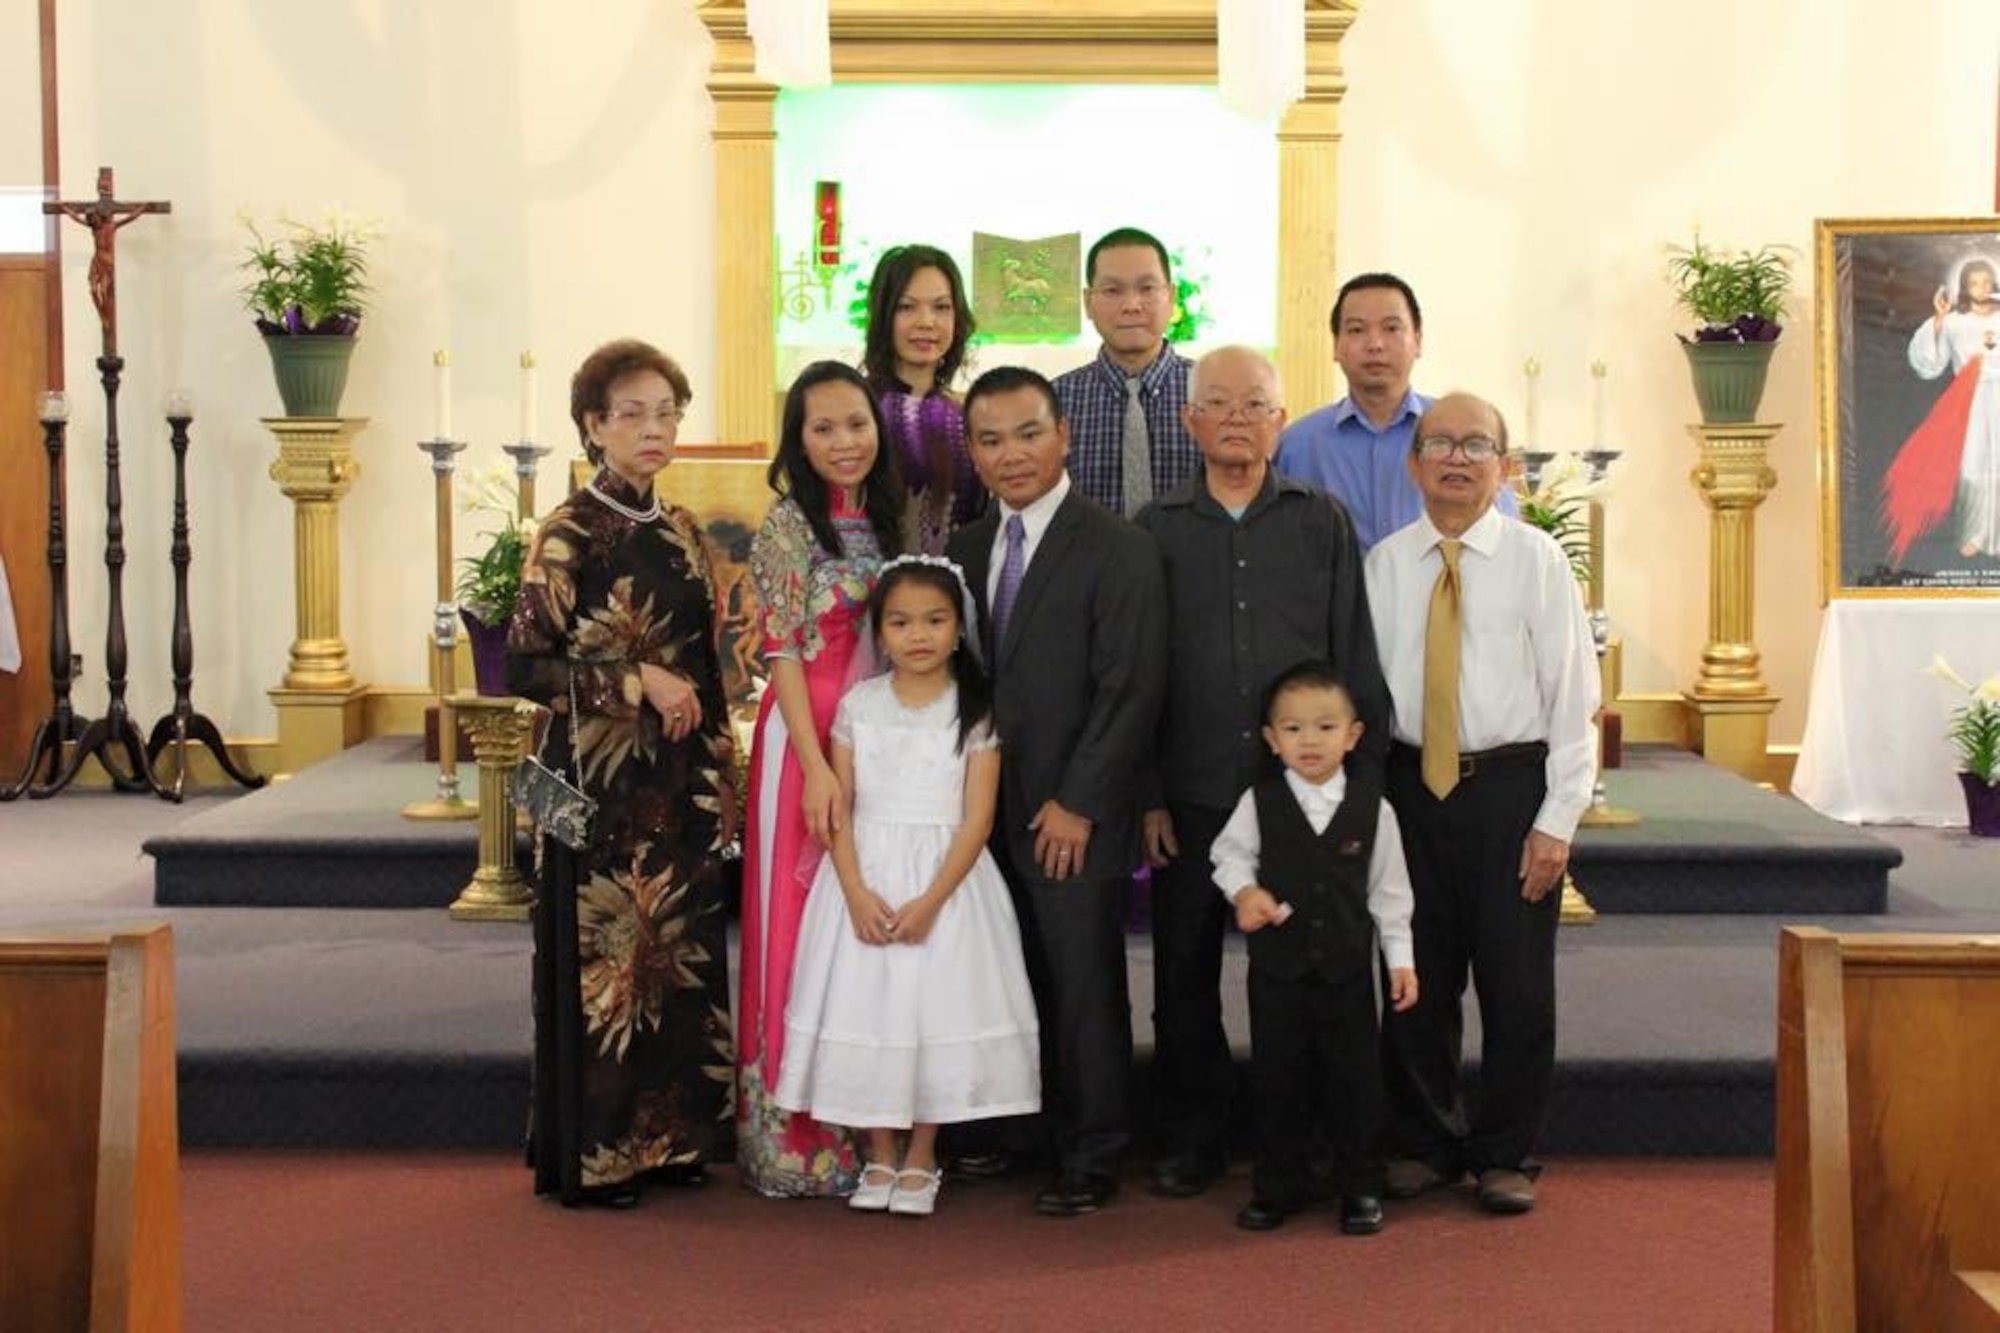 Lt. Col. Asan Bui (center), a flight commander with the 920th Rescue Wing, poses with his family at their local church. Bui, a devout Catholic, said his community and faith provided him with positive outlets growing up, to include piano lessons. The 920th RQW conducts combat-search-and rescue missions at land and sea. (Courtesy photo)